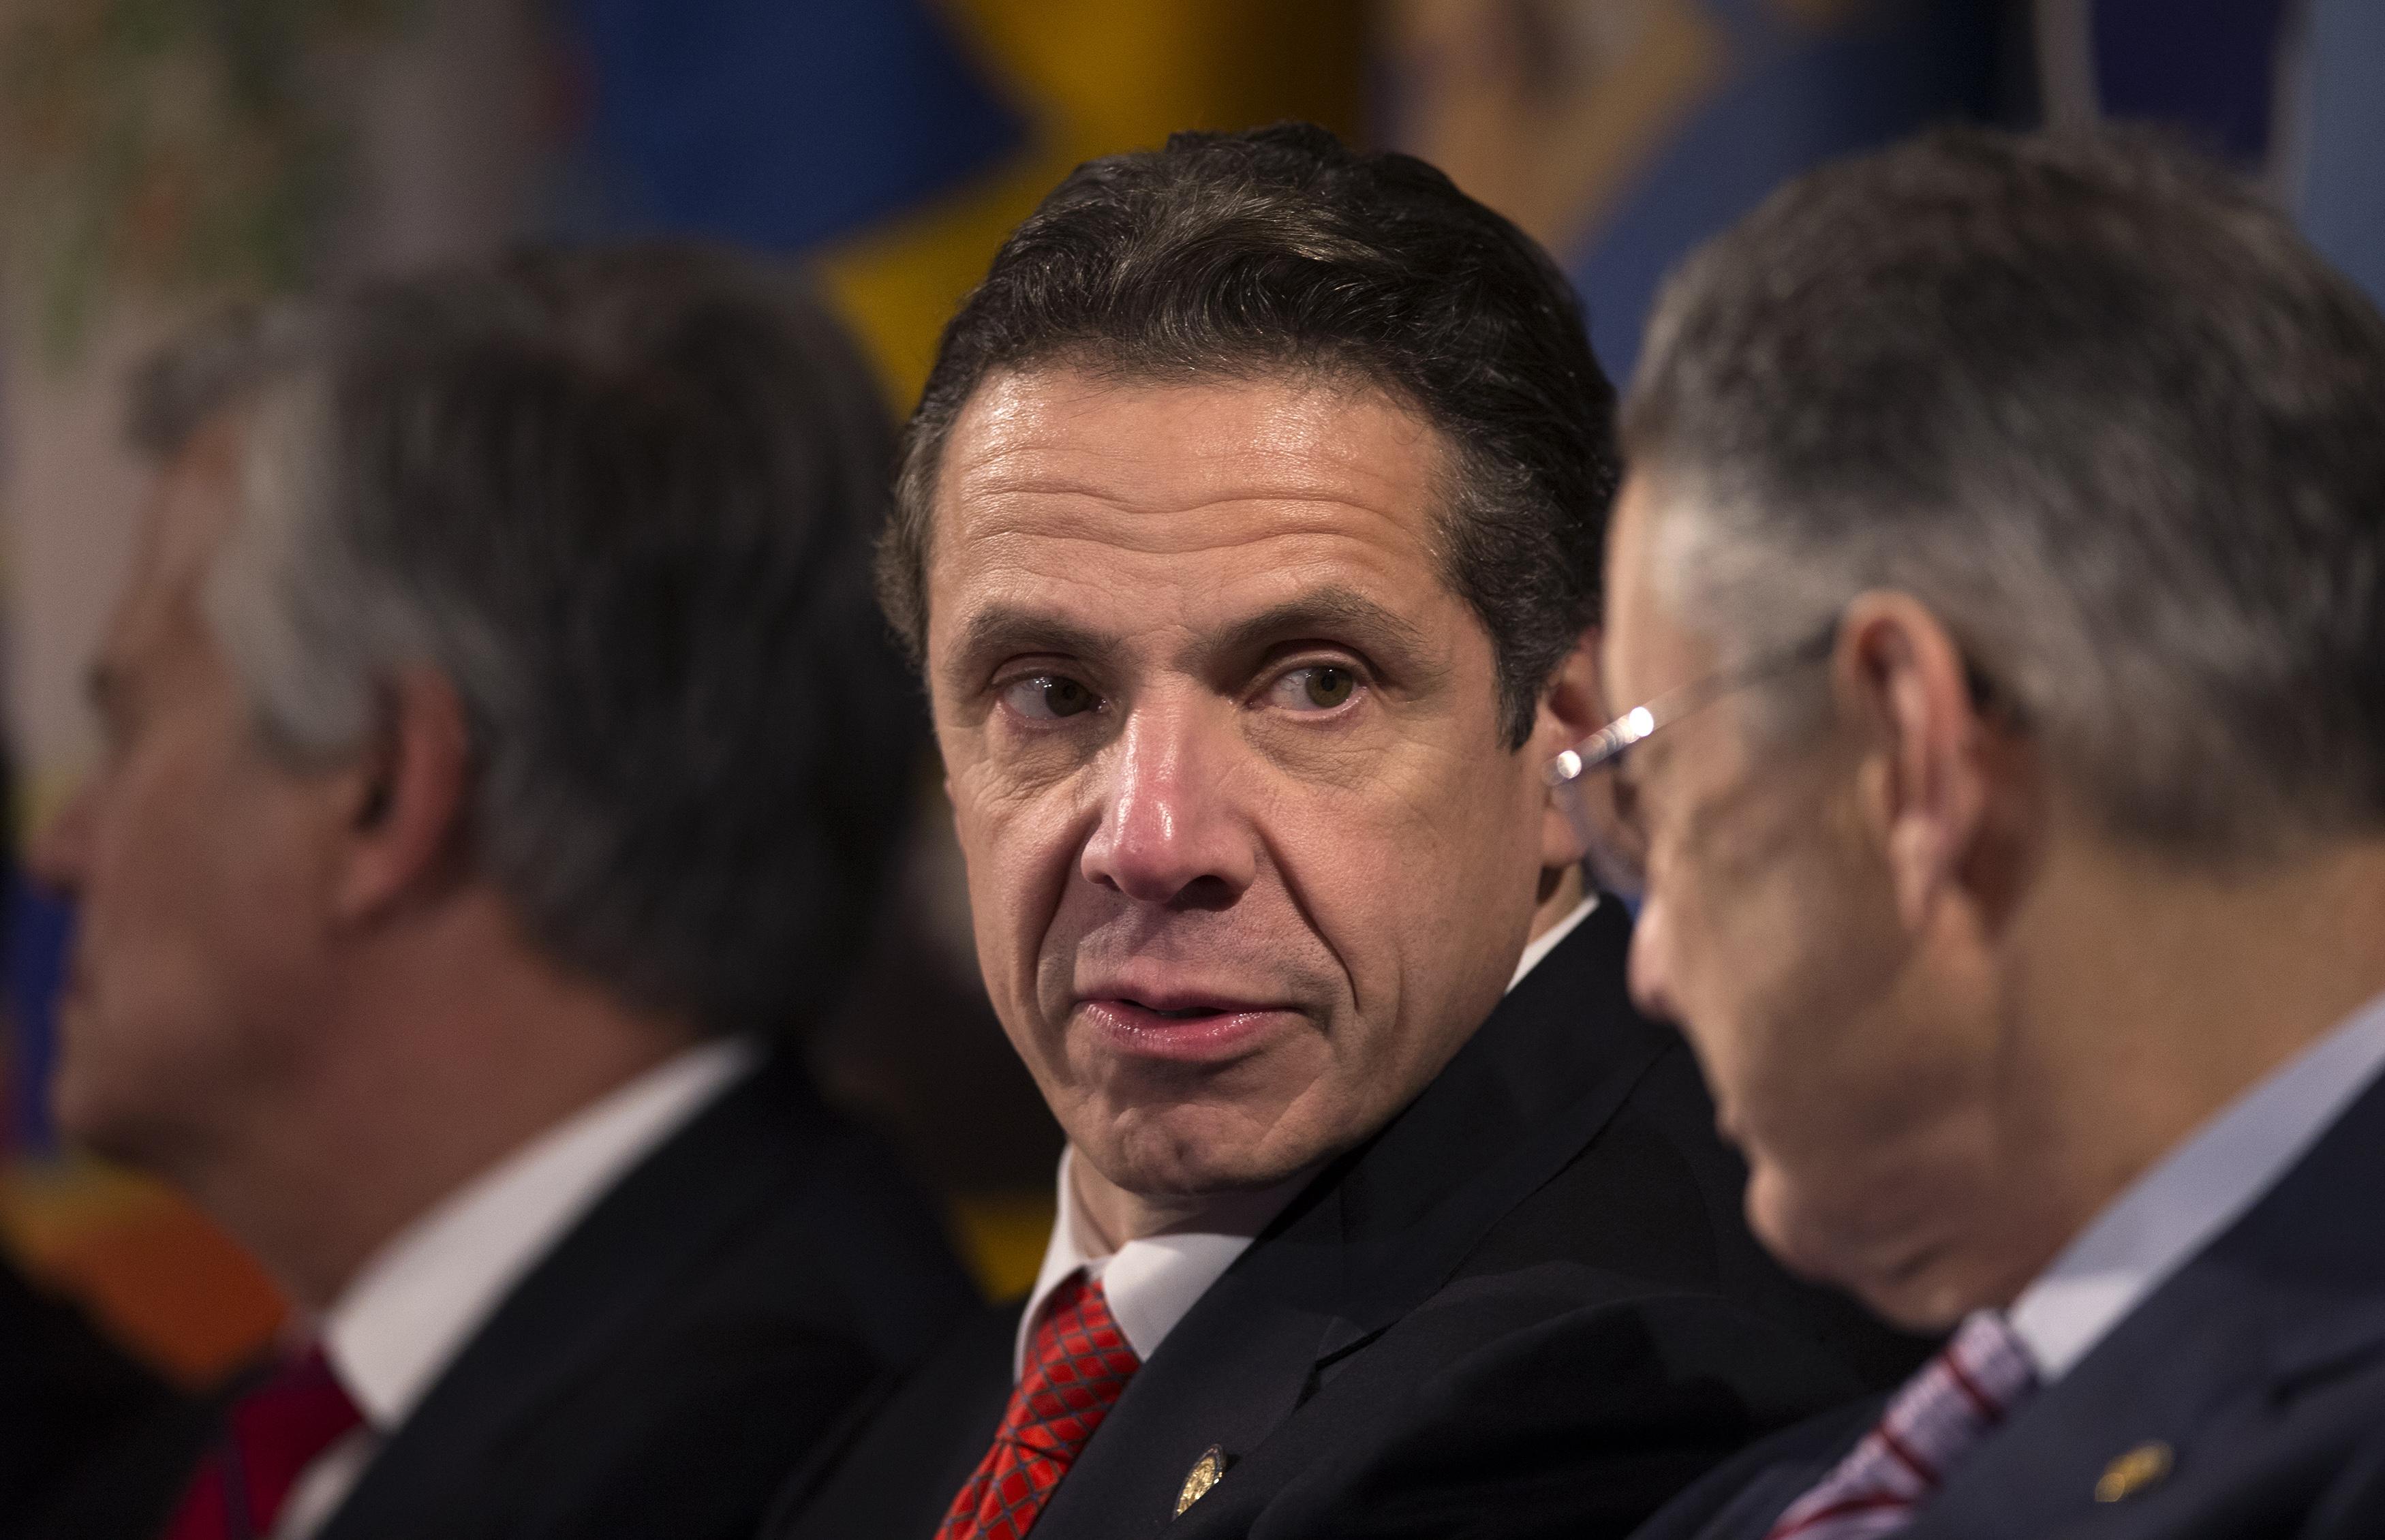 New York Governor Andrew Cuomo to cut taxes